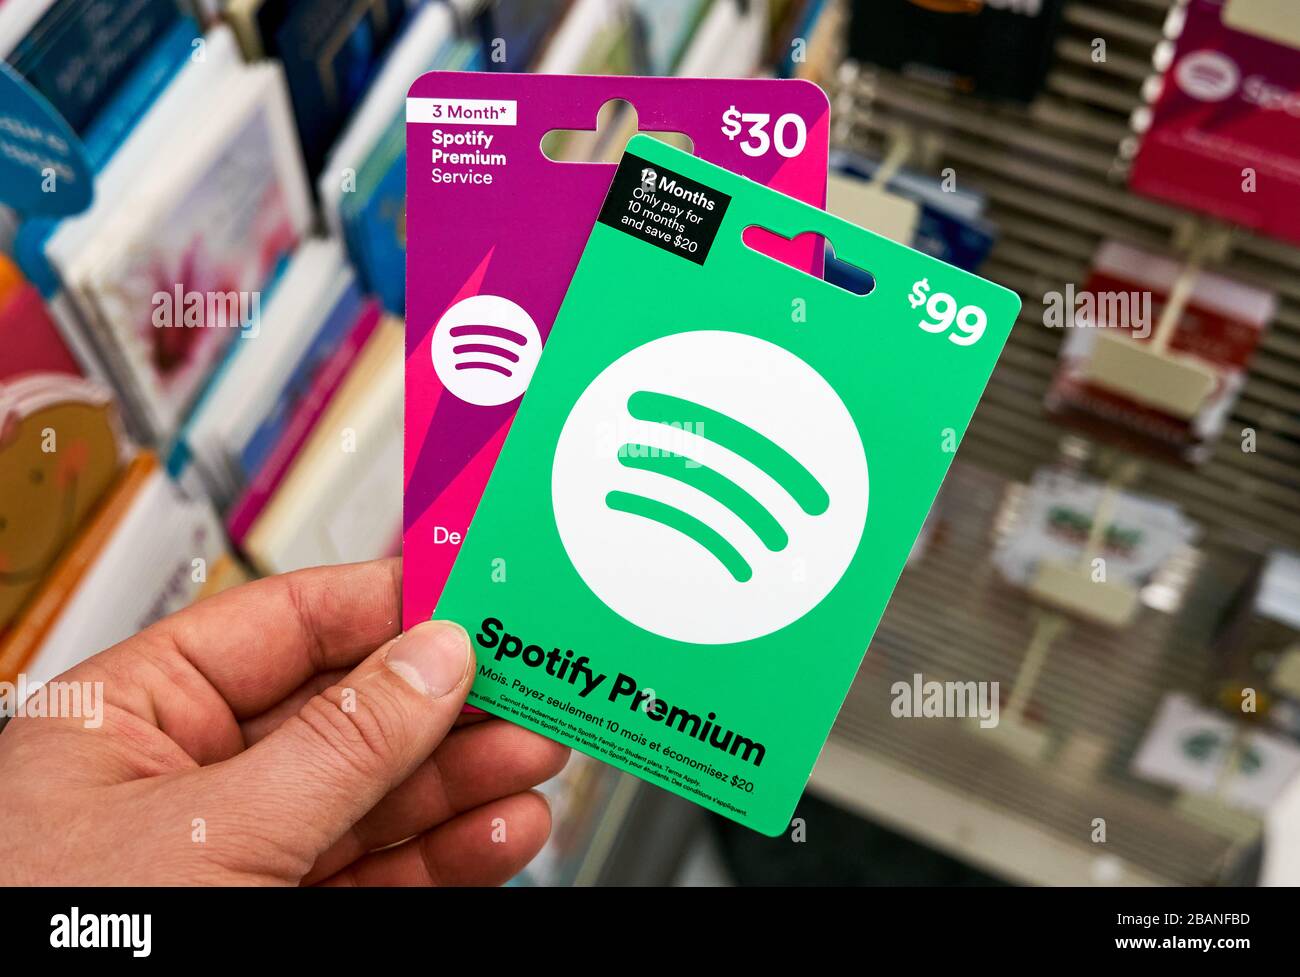  Spotify Premium 12 Month Subscription $99 eGift Card: Gift Cards